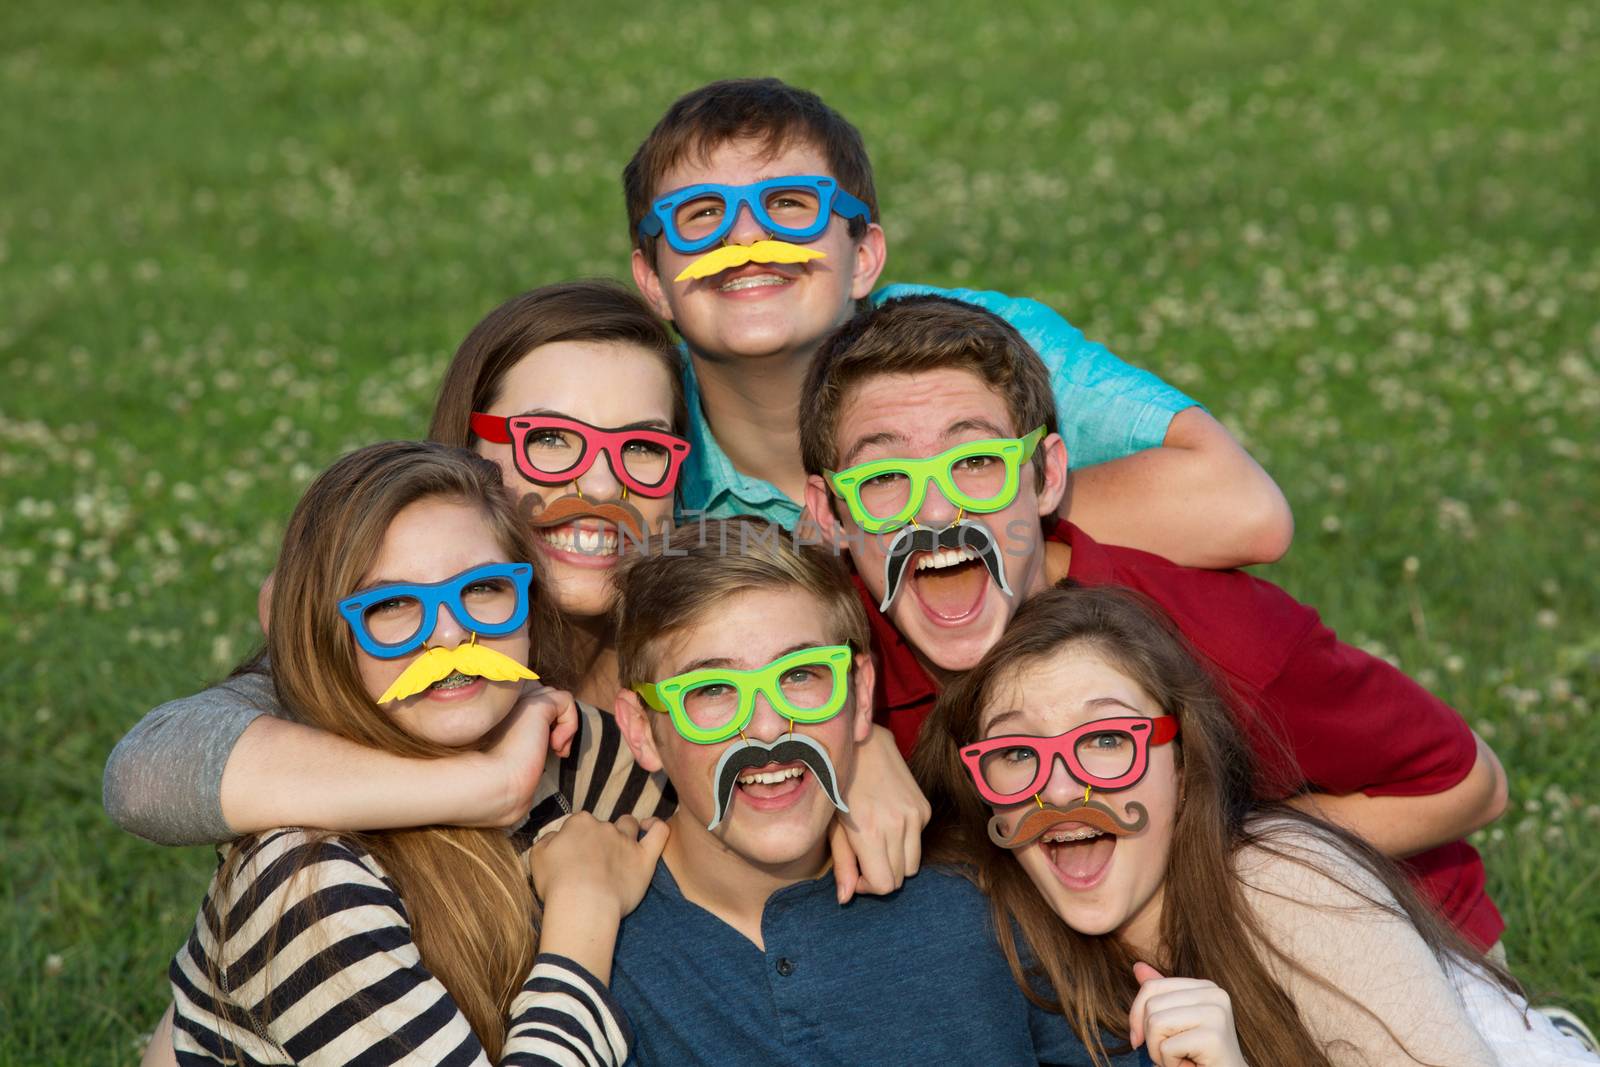 Five teenage male and females in mustache disguise